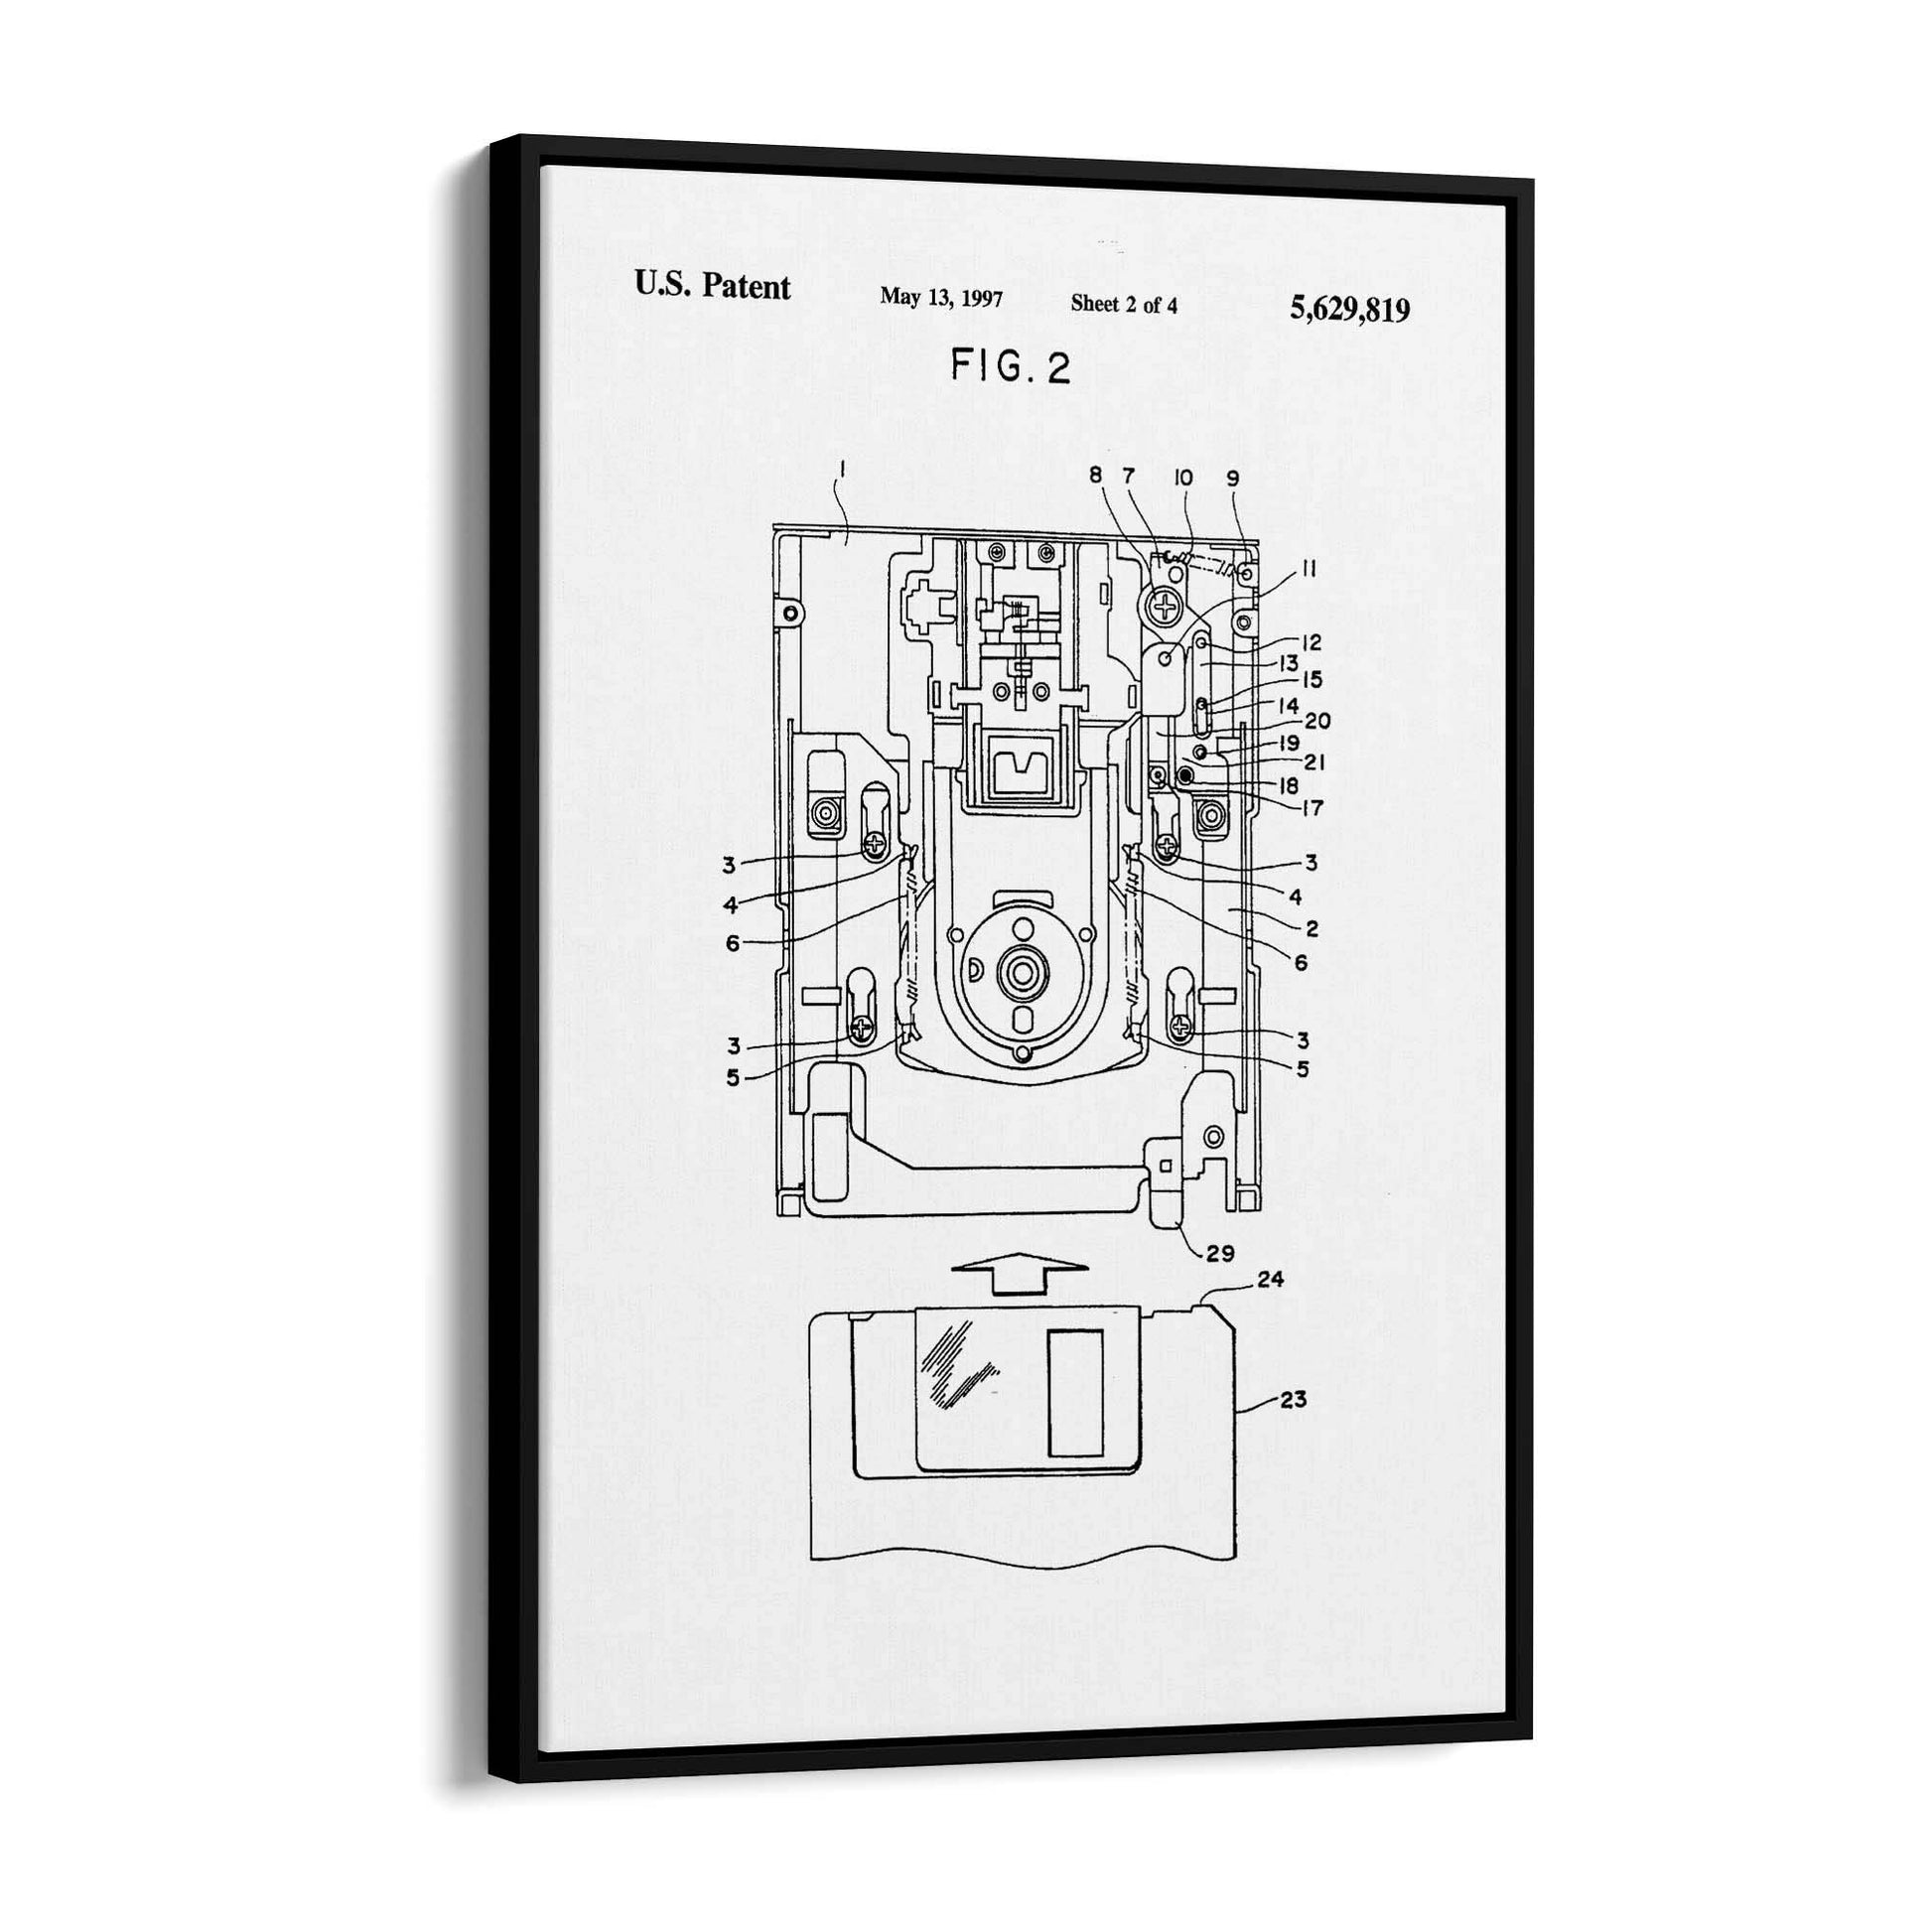 Vintage Floppy Disk Patent Wall Art #2 - The Affordable Art Company